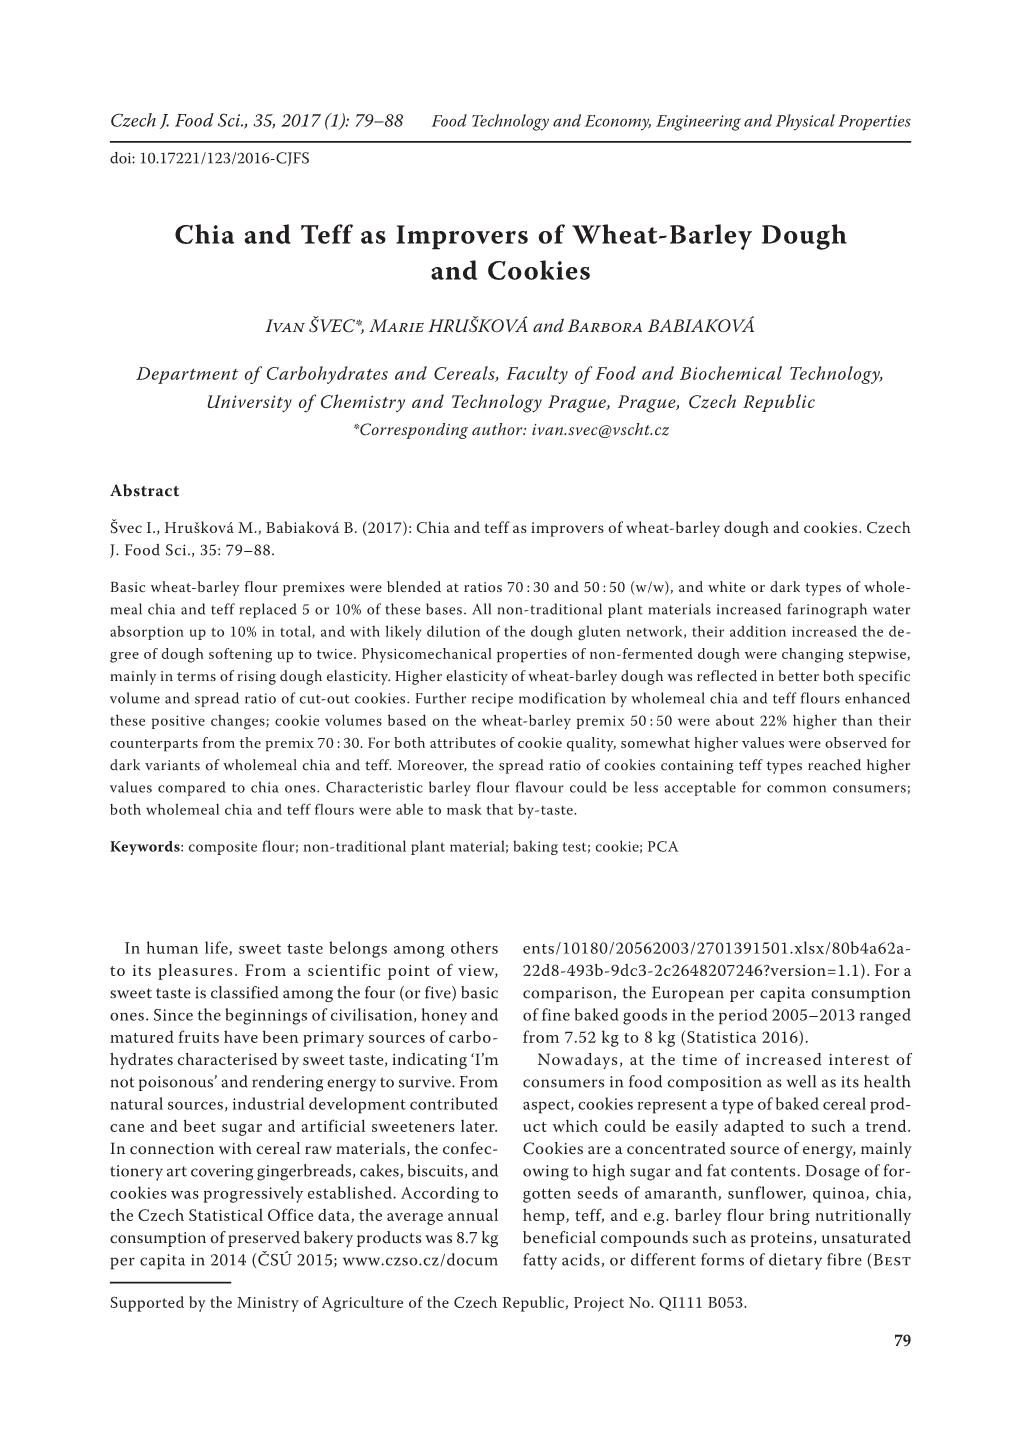 Chia and Teff As Improvers of Wheat-Barley Dough and Cookies